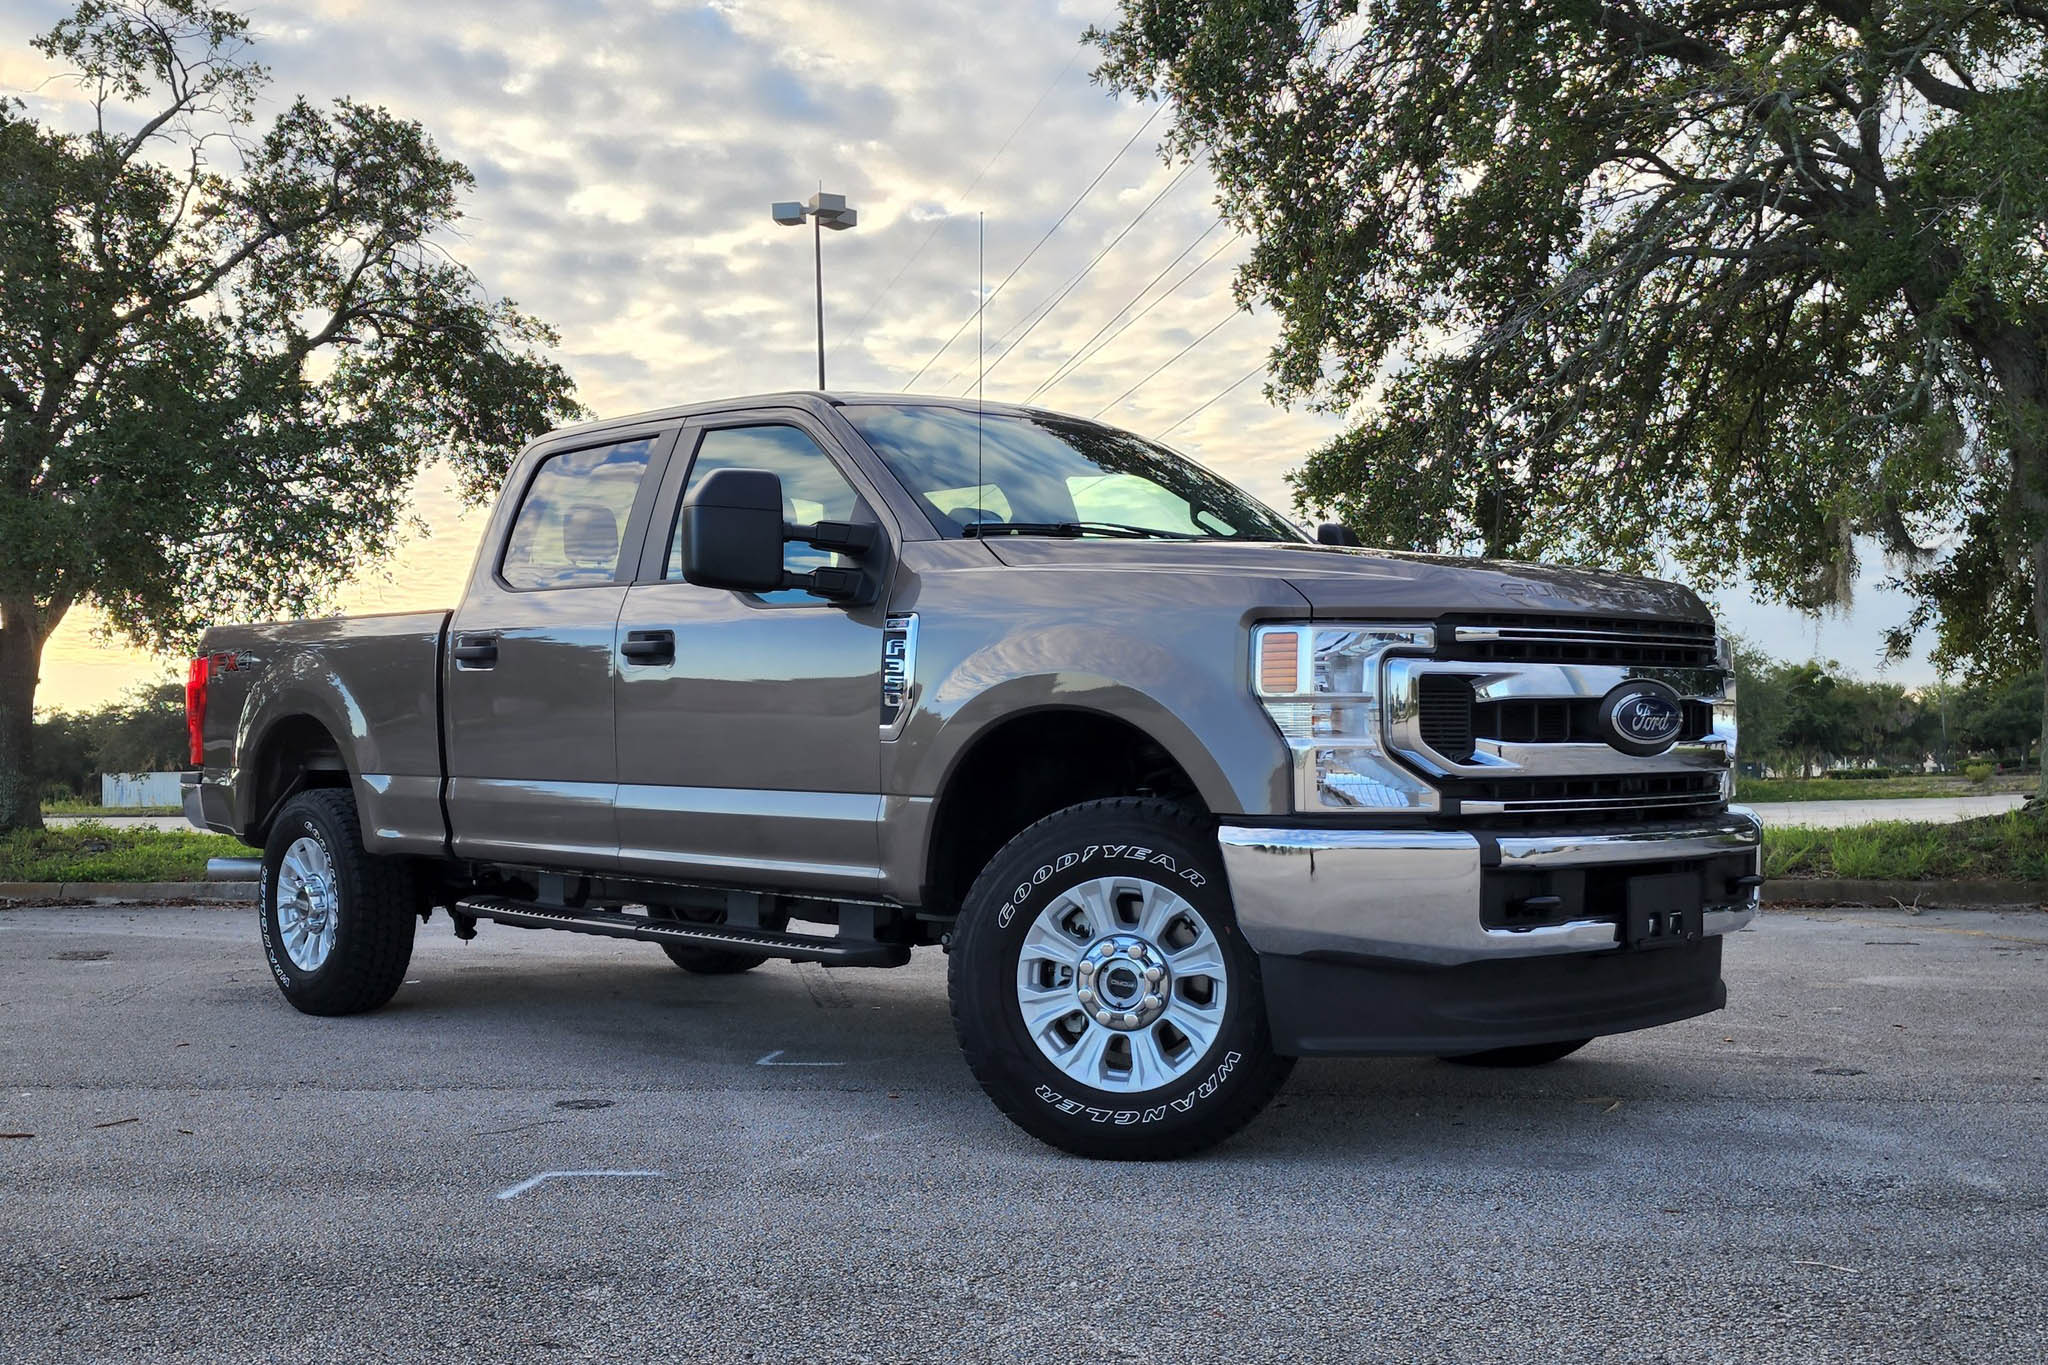 Bully Dog Levels Super Duty Playing Field With 6.2L Tune